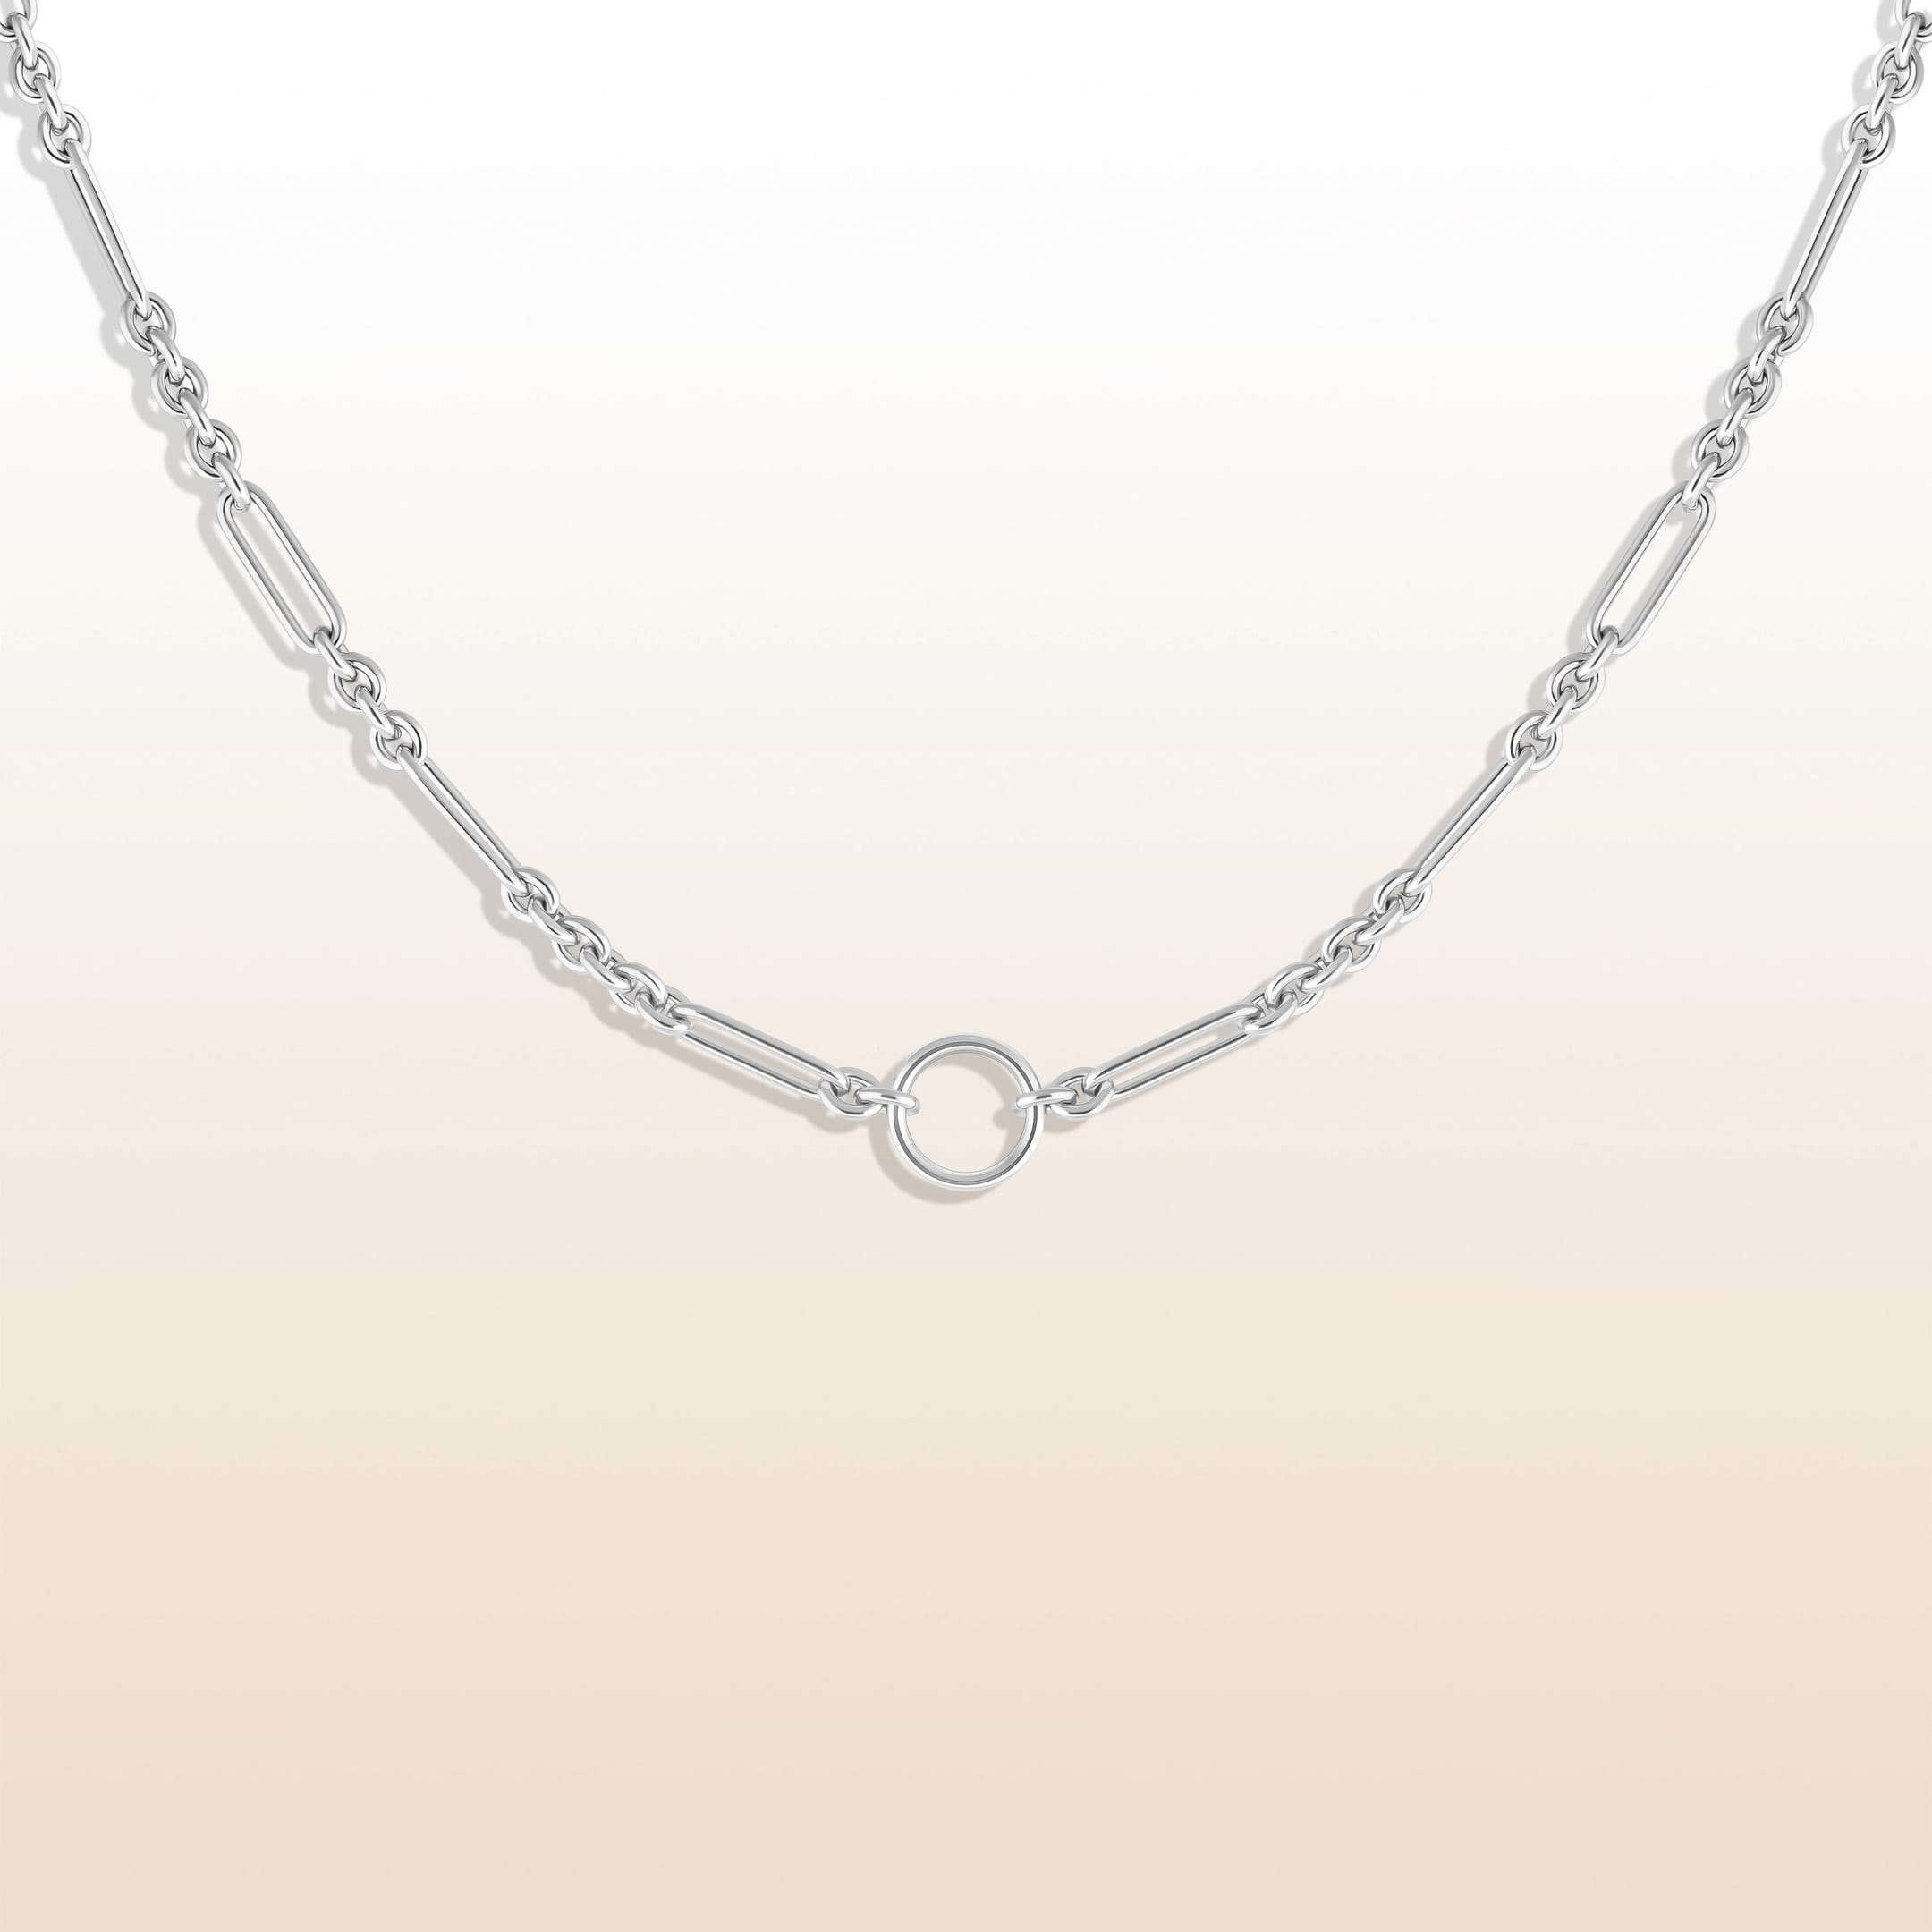 Picture of Celestial Ties - Silver Necklace